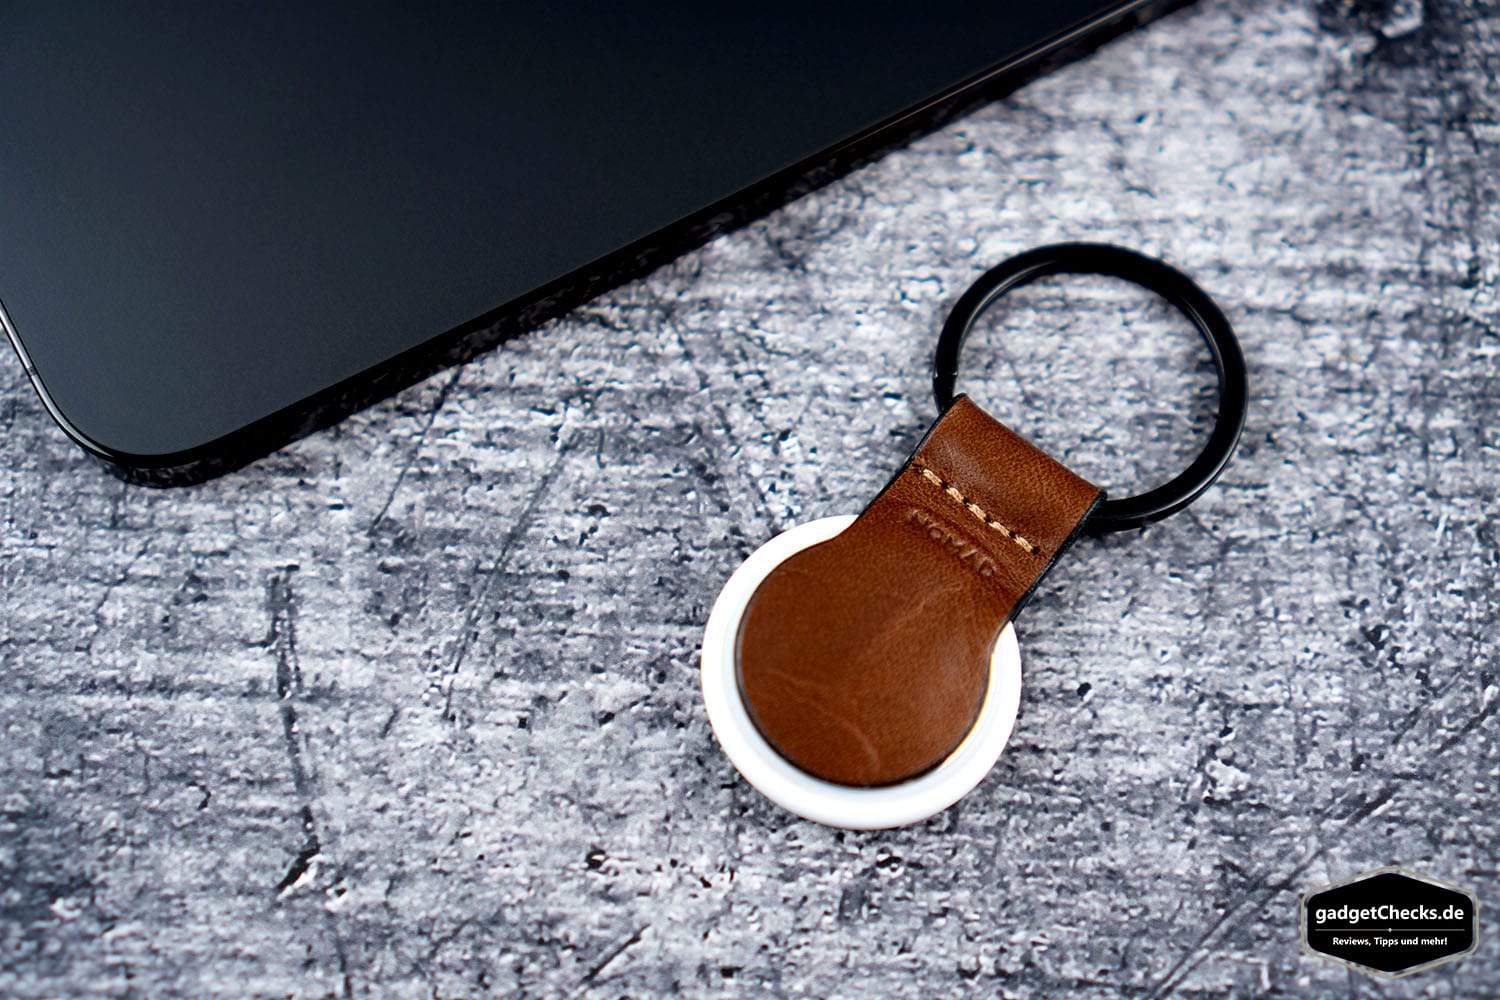 Review: Nomad Leather Loop - Apple AirTag - gadgetChecks - Reviews, Tipps  und mehr!